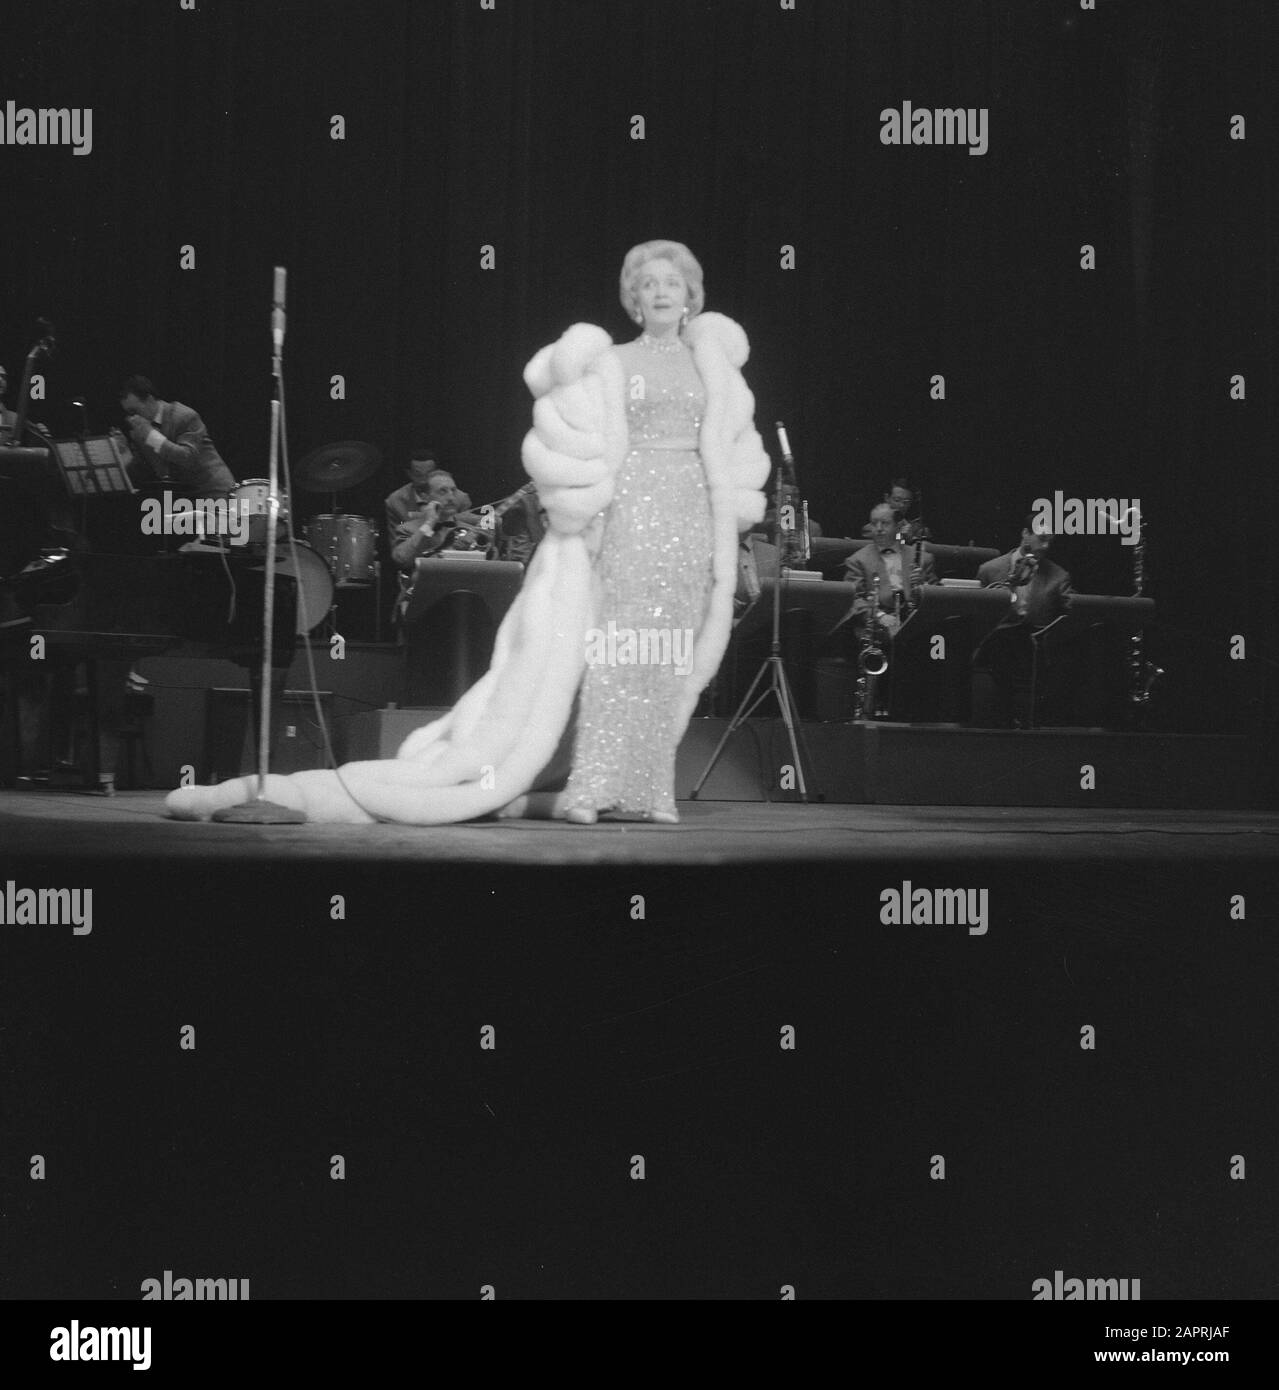 Night Performance By Marlene Dietrich At The Tuschinkitheater In Amsterdam Date May 28 1960 Location Amsterdam Noord Holland Keywords Actresses Movie Stars Theatre Performances Etc Singers Personal Name Dietrich Marlene Stock Photo Alamy